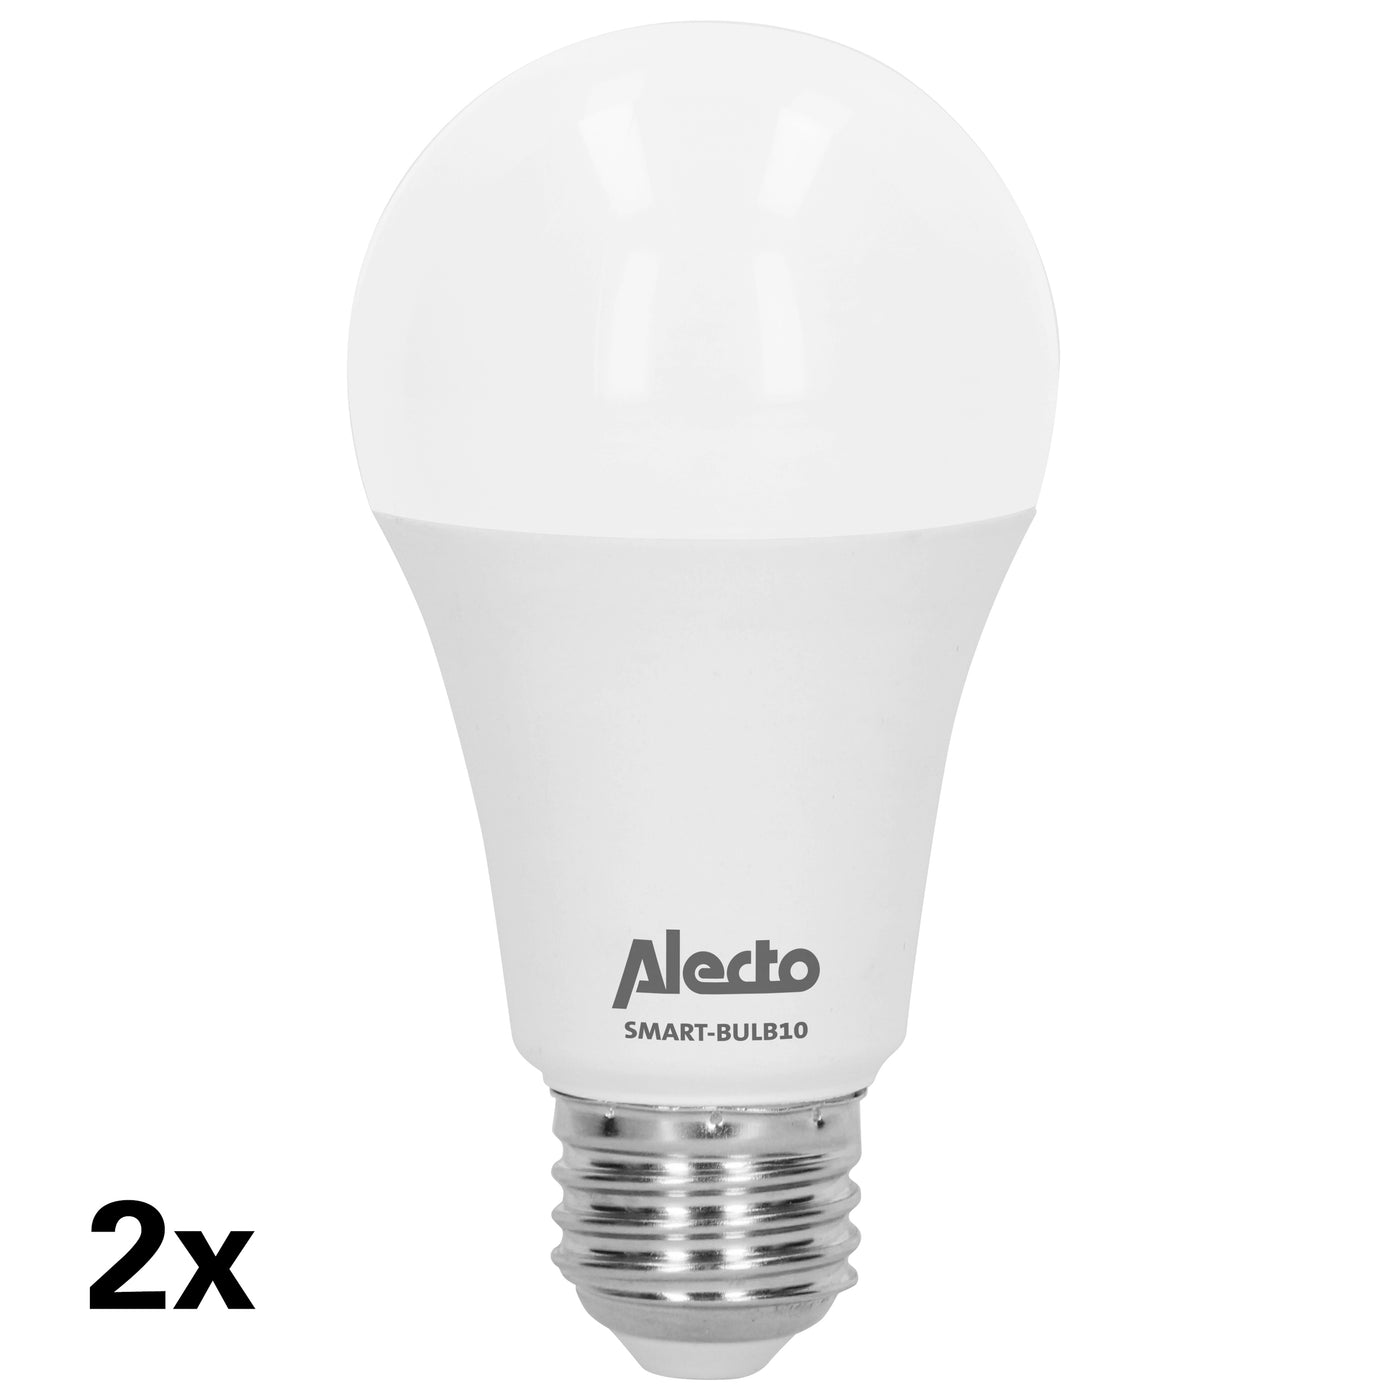 Alecto SMART-BULB10 DUO - Smarte WLAN LED-Lampe, 2er-Pack, weiß